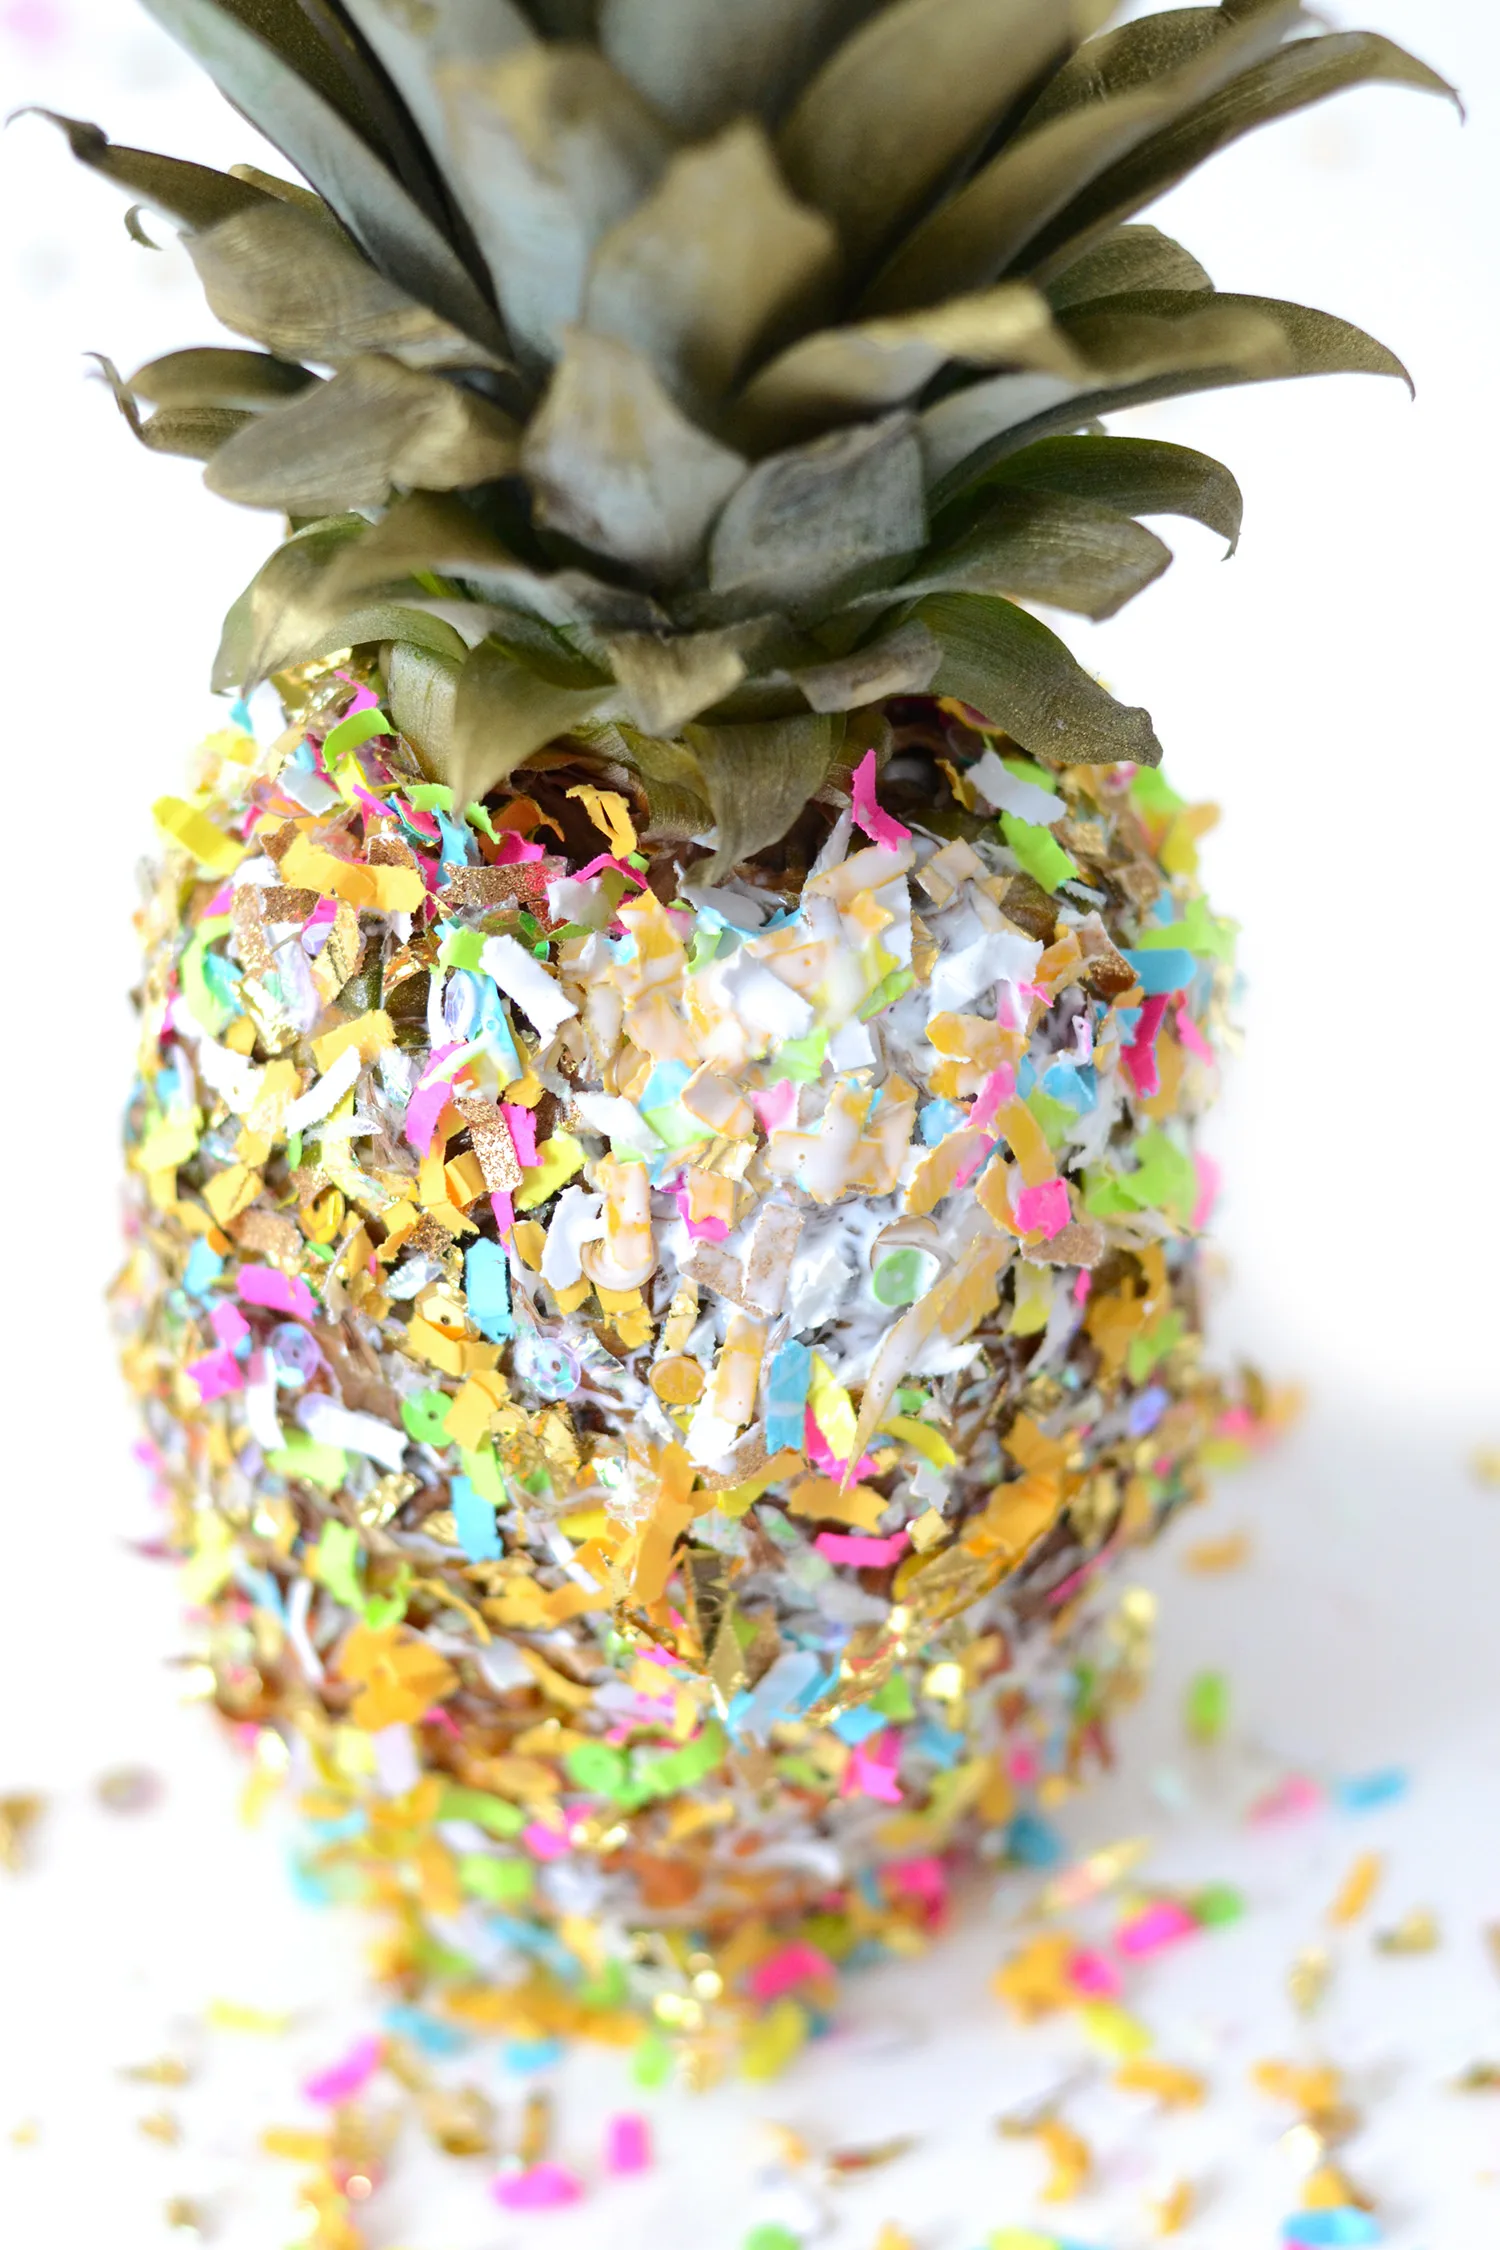 Touching up bare spots on a pineapple with Mod Podge and confetti